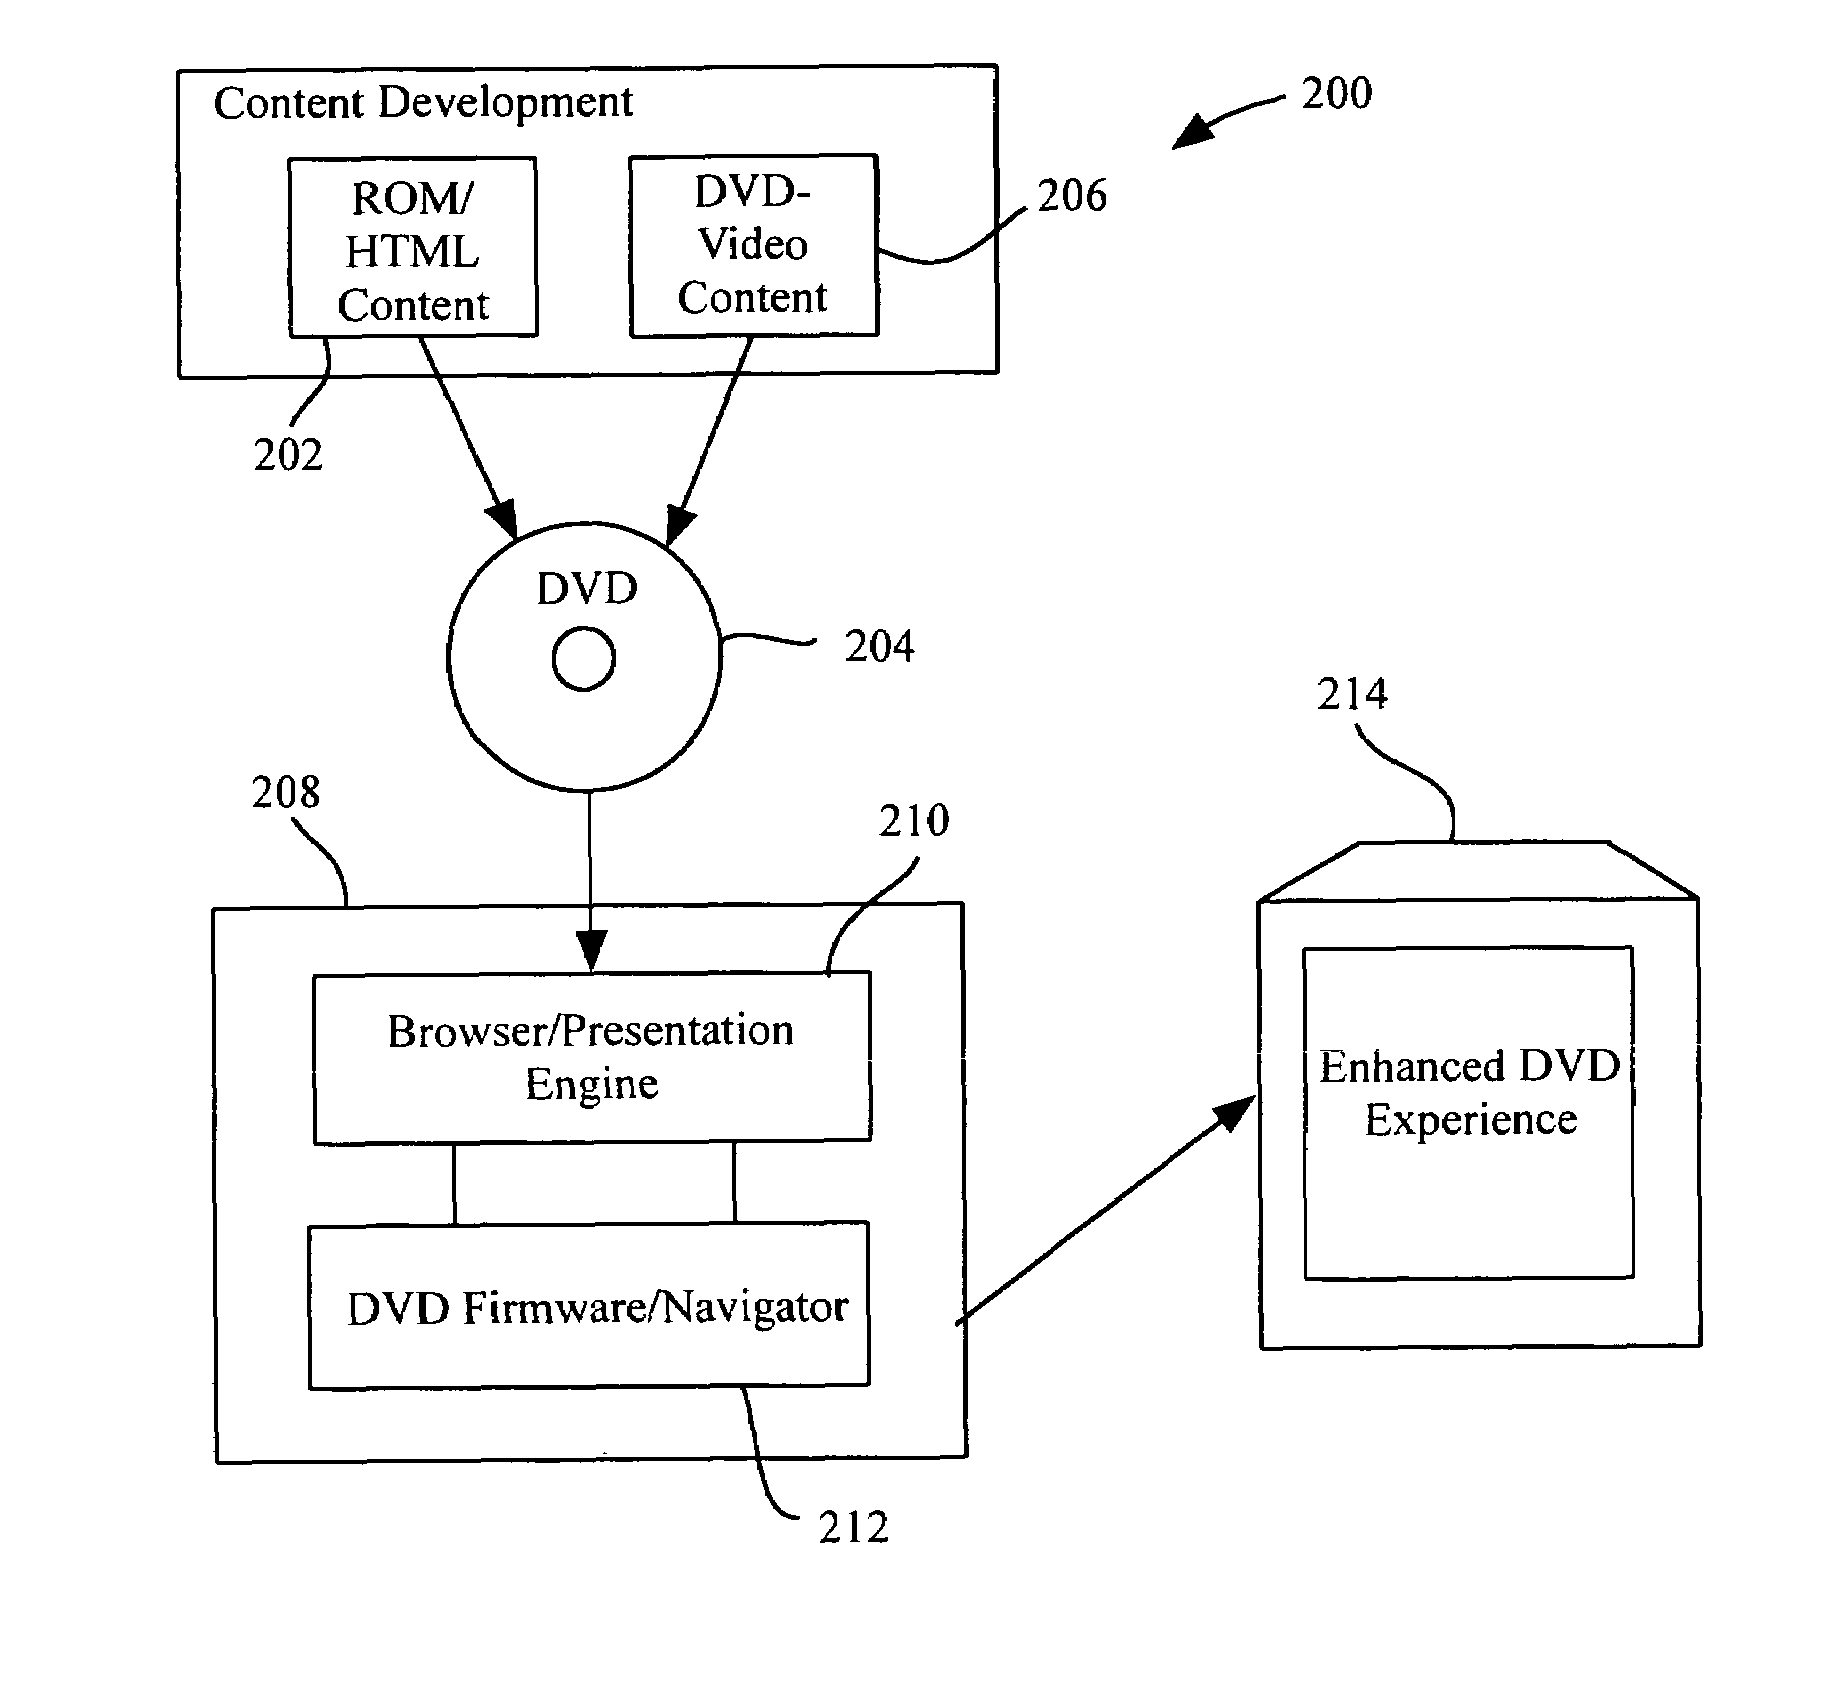 System, method and article of manufacture for a common cross platform framework for development of DVD-Video content integrated with ROM content